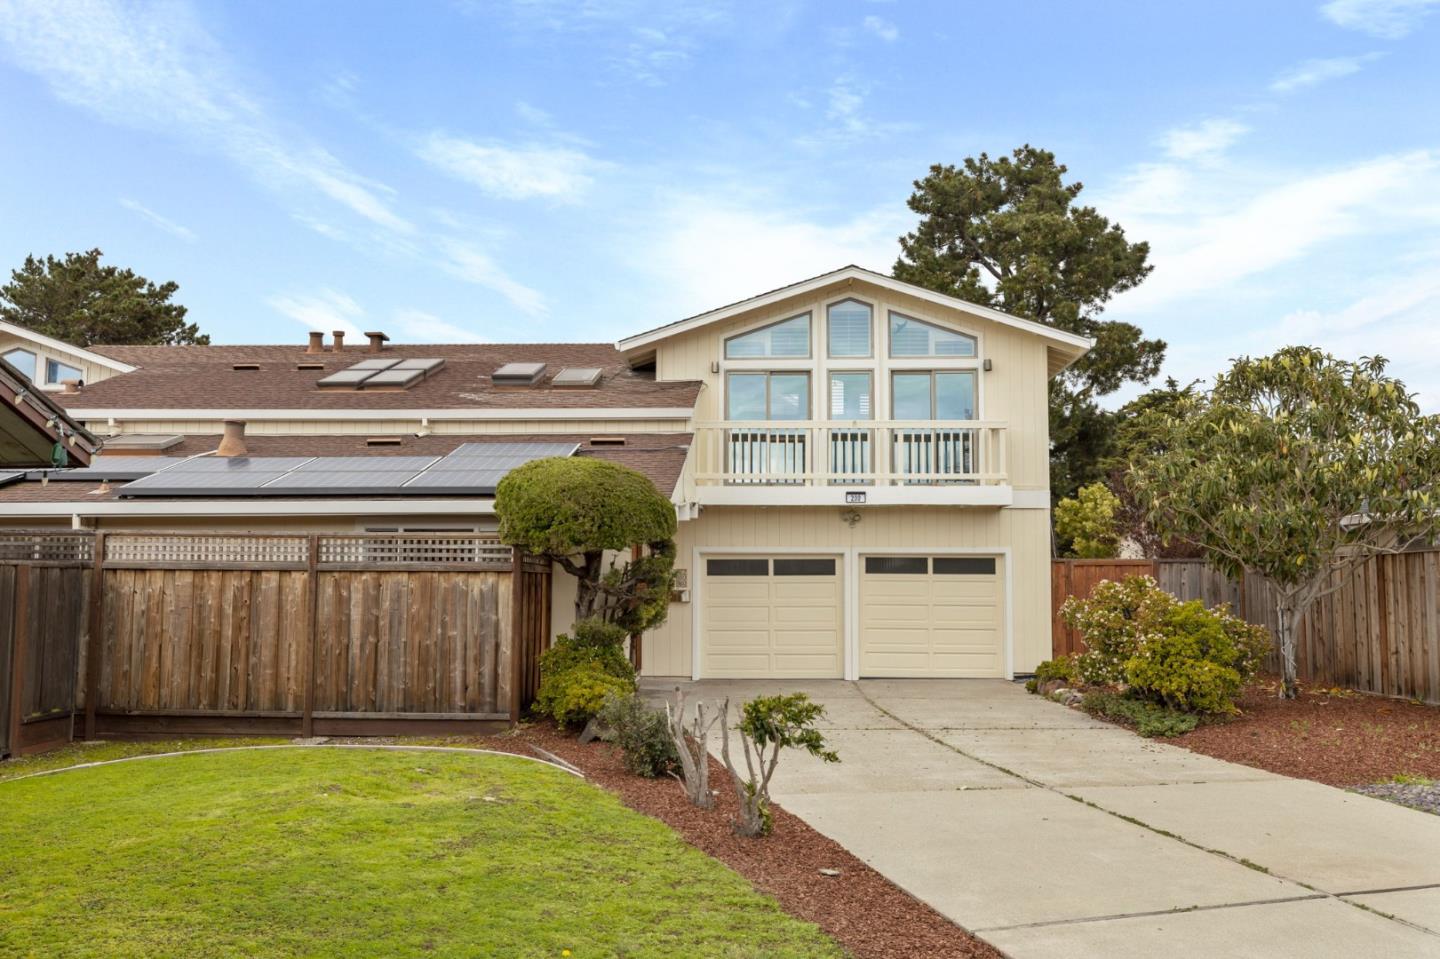 Photo of 200 Turnstone Ct in Foster City, CA